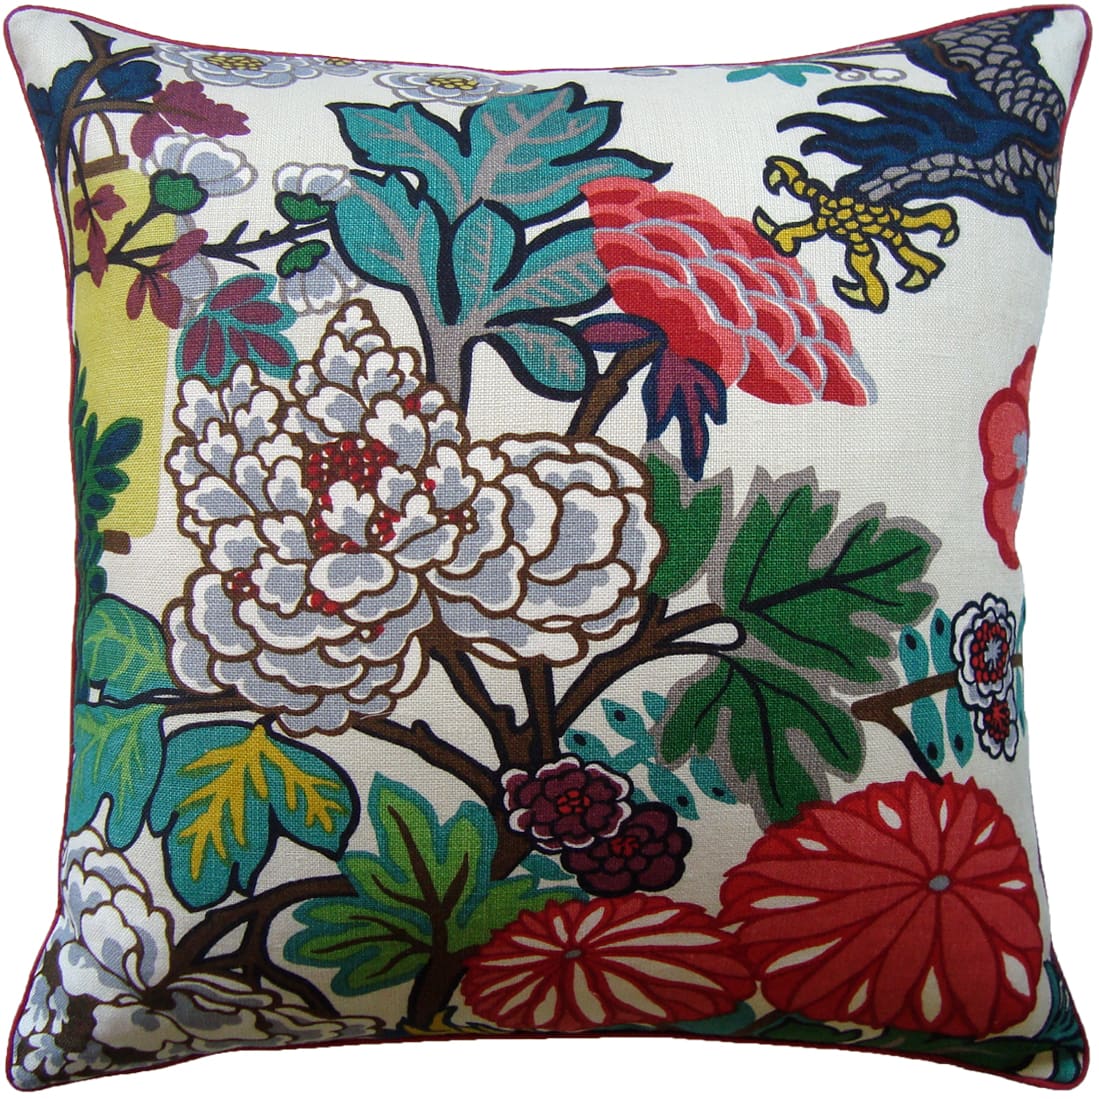 chiang dragon pillow exotic home decor by gdc home, Charleston